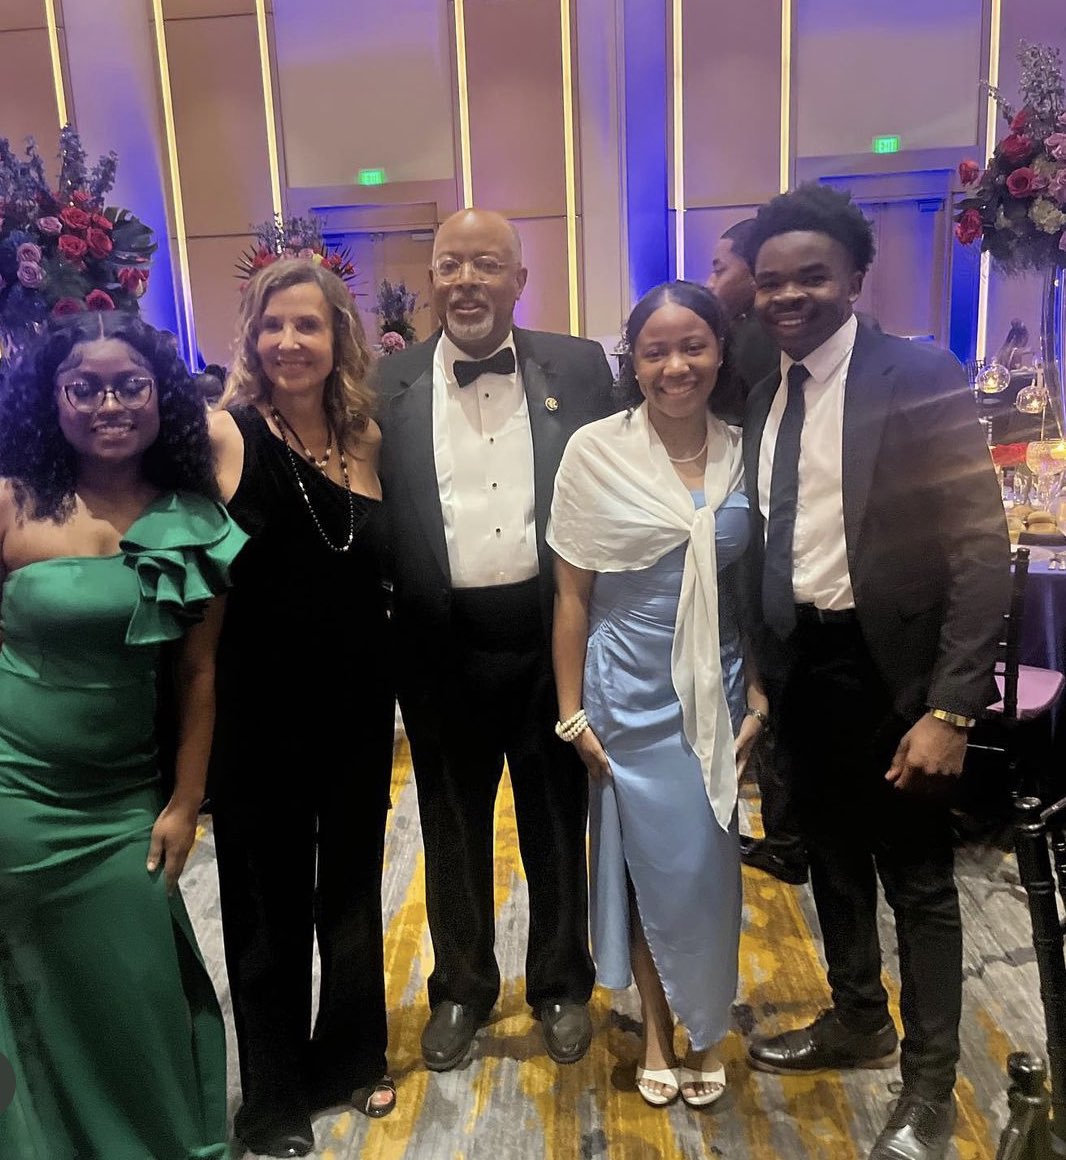 Had a wonderful time last night at the 2023 PGCPS Hall of Fame Gala that has been hosted by the Excellence In Education Foundation for PGCPS, which supports raising funds for scholarships for students! #PGCPSProud